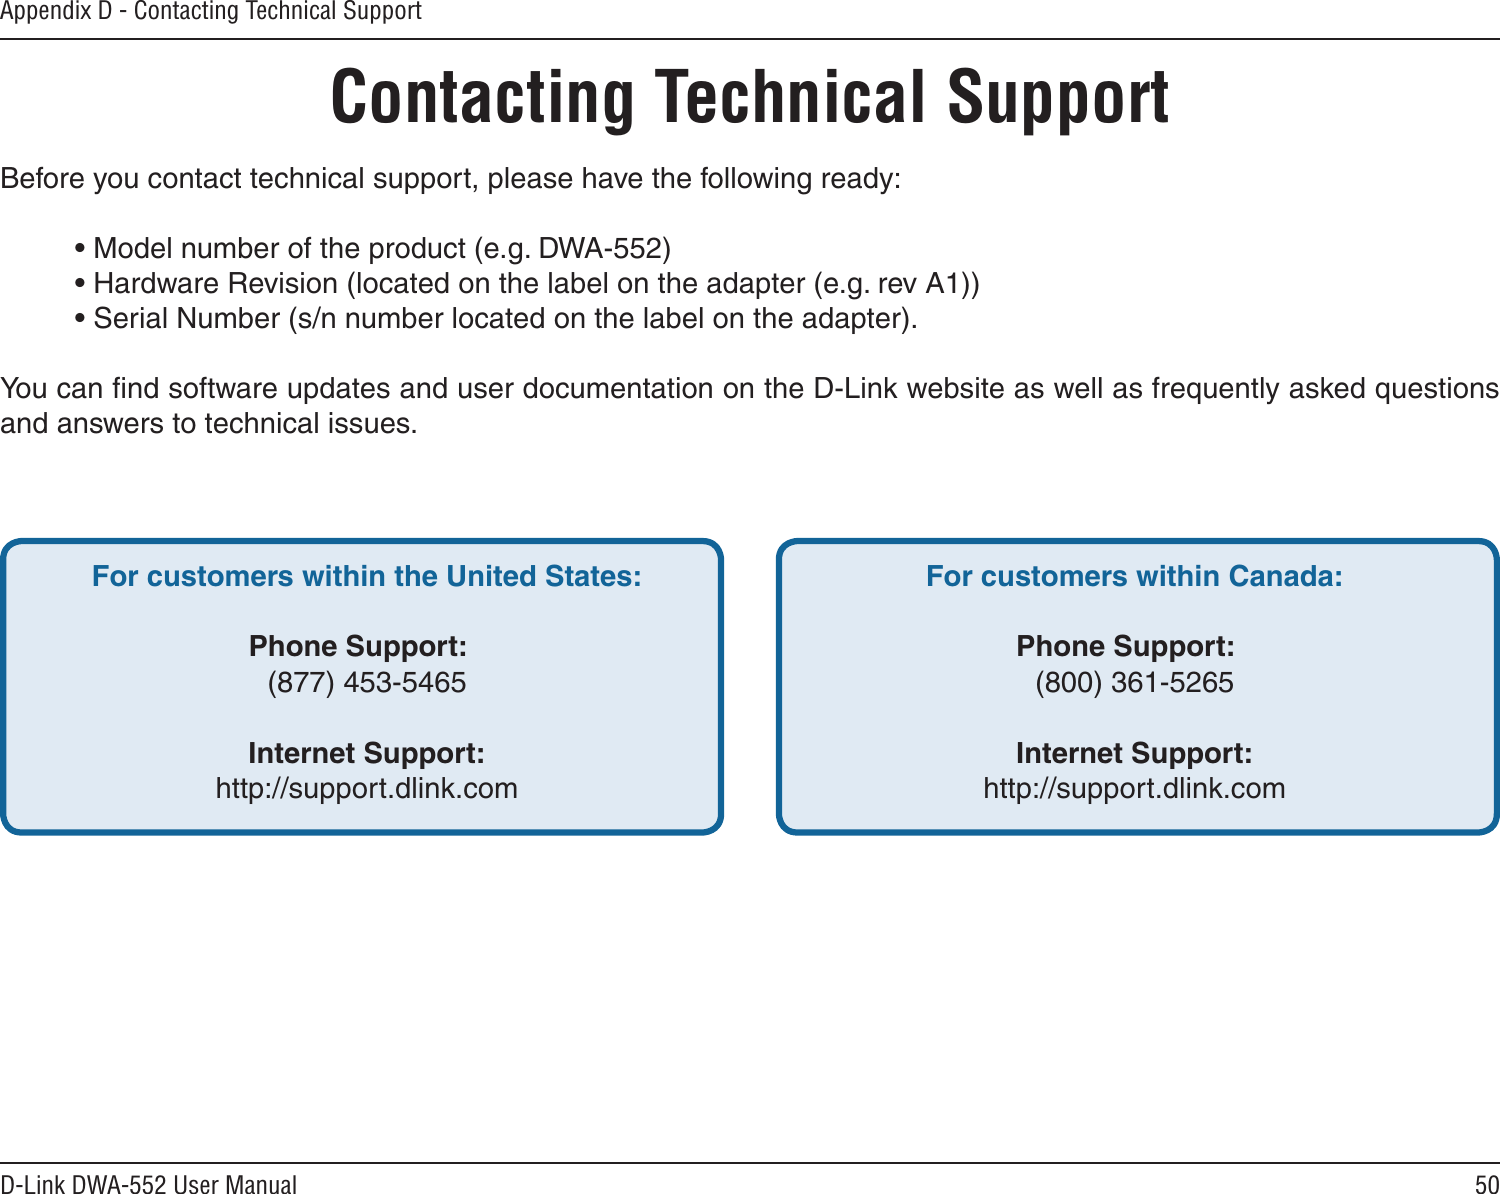 50D-Link DWA-552 User ManualAppendix D - Contacting Technical SupportContacting Technical SupportBefore you contact technical support, please have the following ready:  • Model number of the product (e.g. DWA-552)  • Hardware Revision (located on the label on the adapter (e.g. rev A1))  • Serial Number (s/n number located on the label on the adapter). You can ﬁnd software updates and user documentation on the D-Link website as well as frequently asked questions and answers to technical issues.For customers within the United States: Phone Support:  (877) 453-5465 Internet Support:  http://support.dlink.com For customers within Canada: Phone Support:  (800) 361-5265    Internet Support:  http://support.dlink.com 